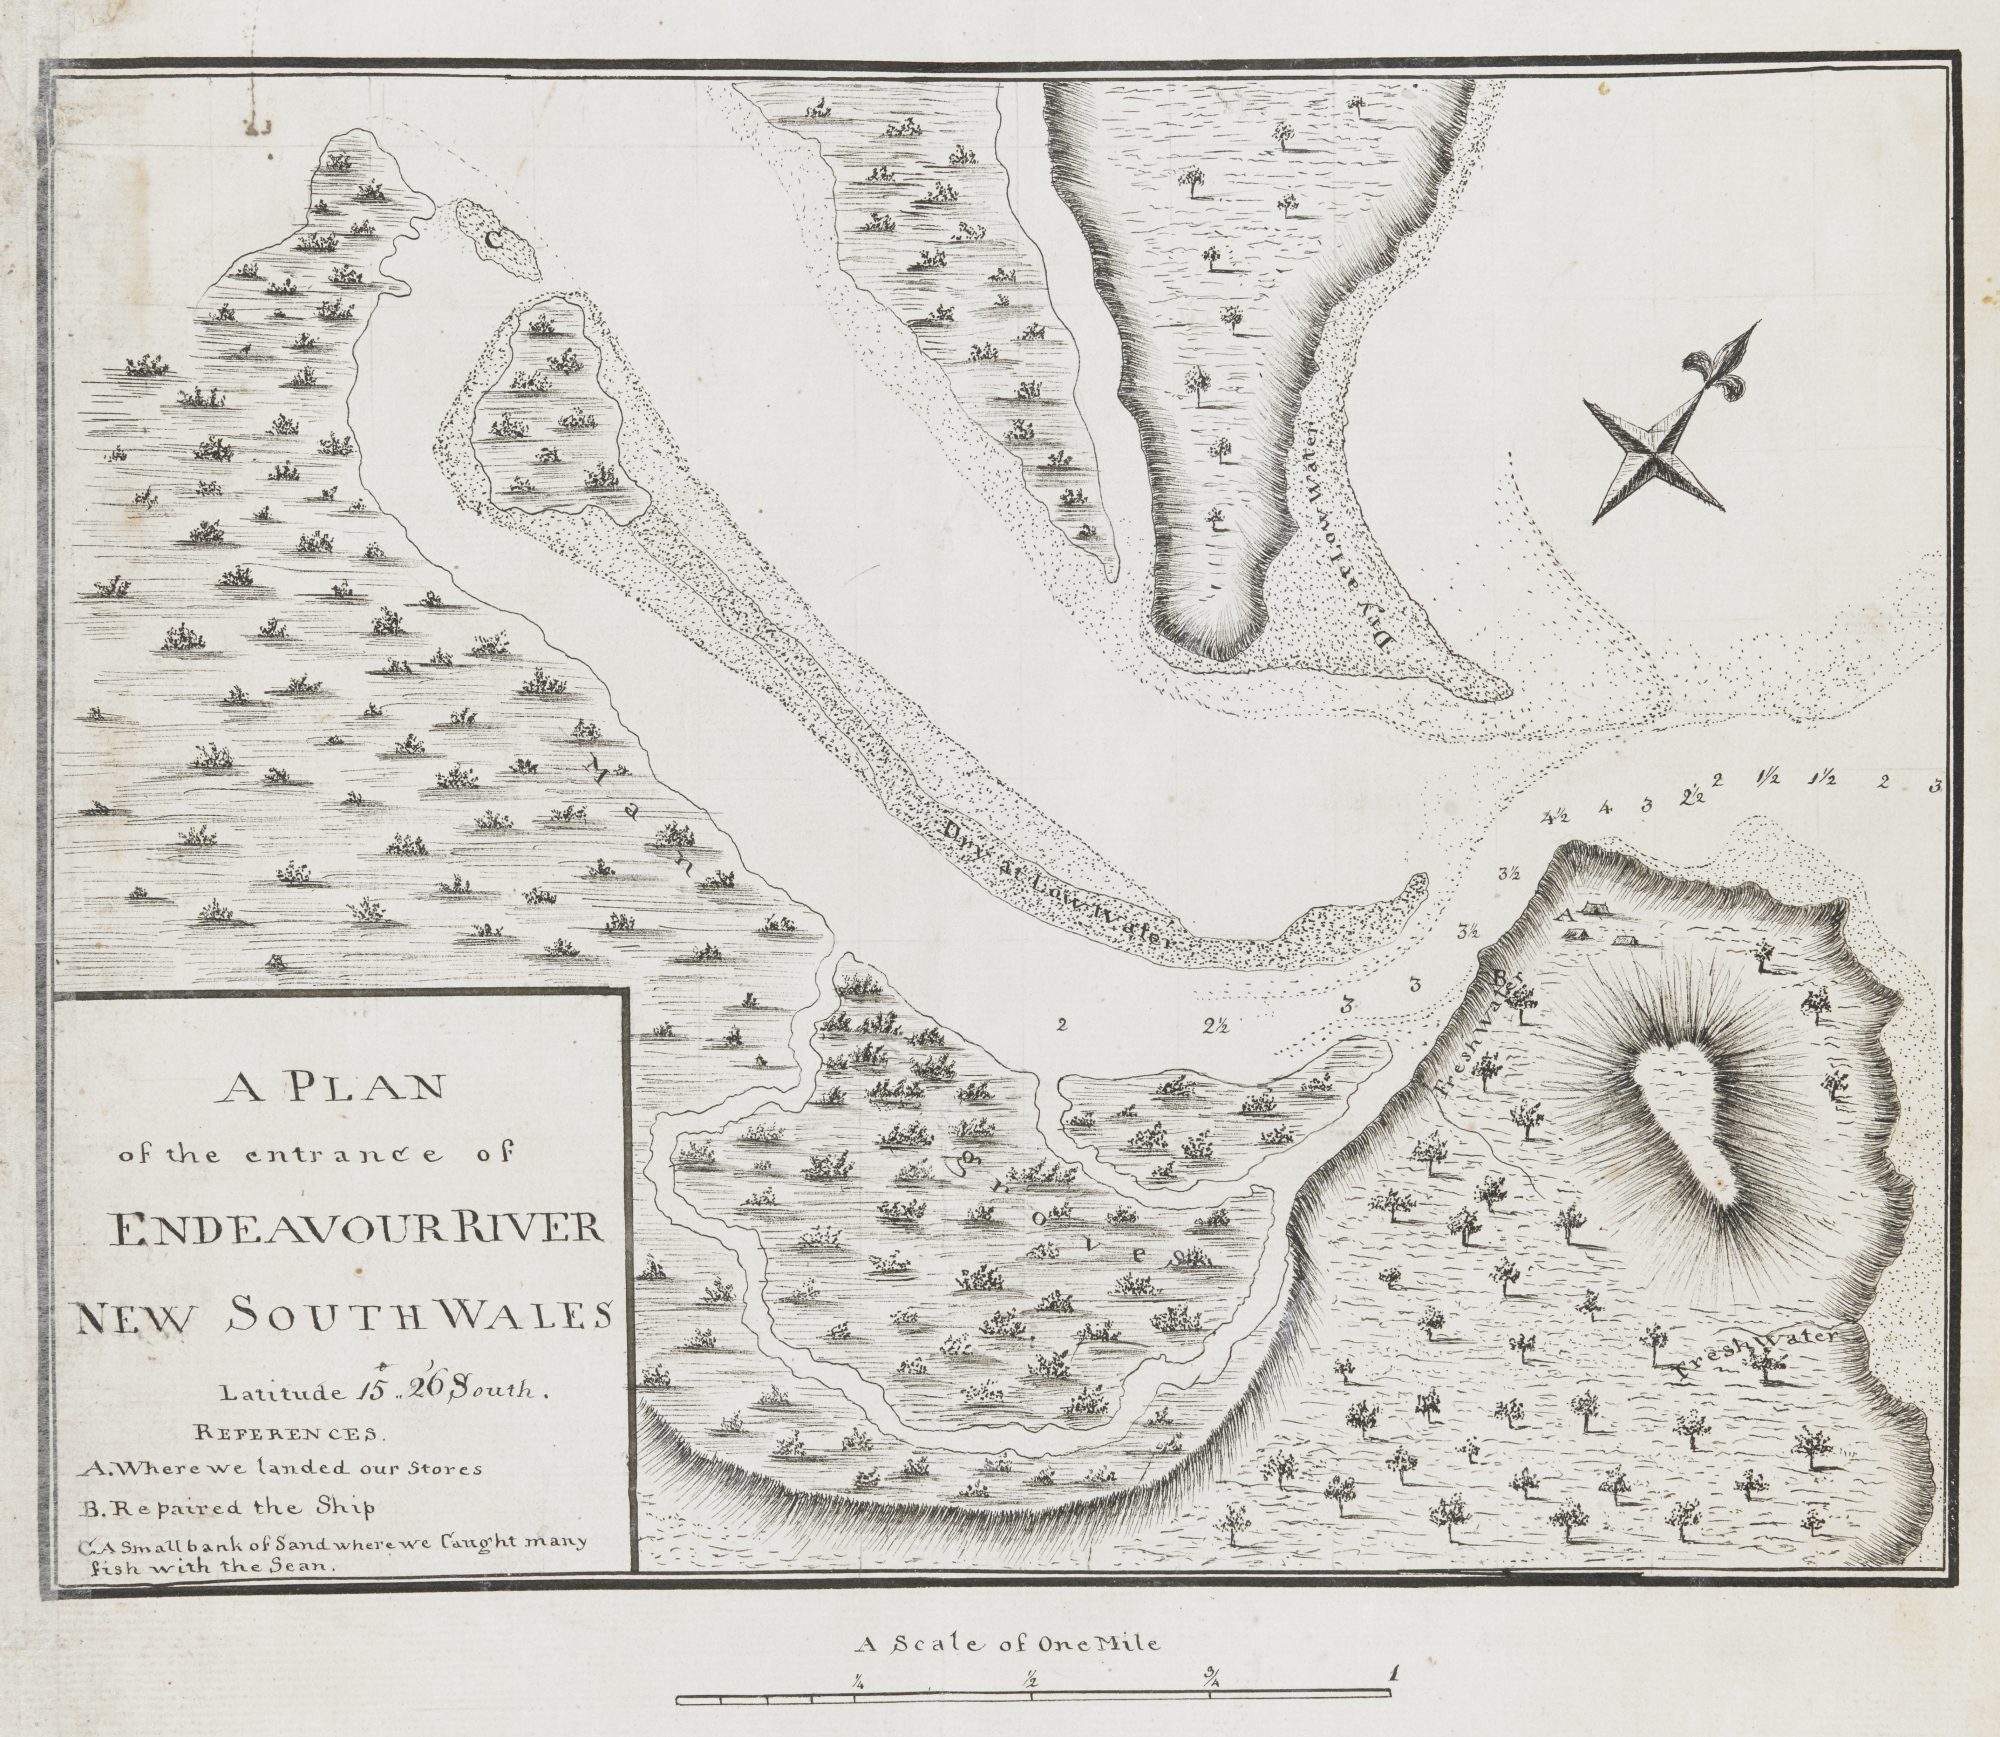 Cook’s map of the Endeavour River.